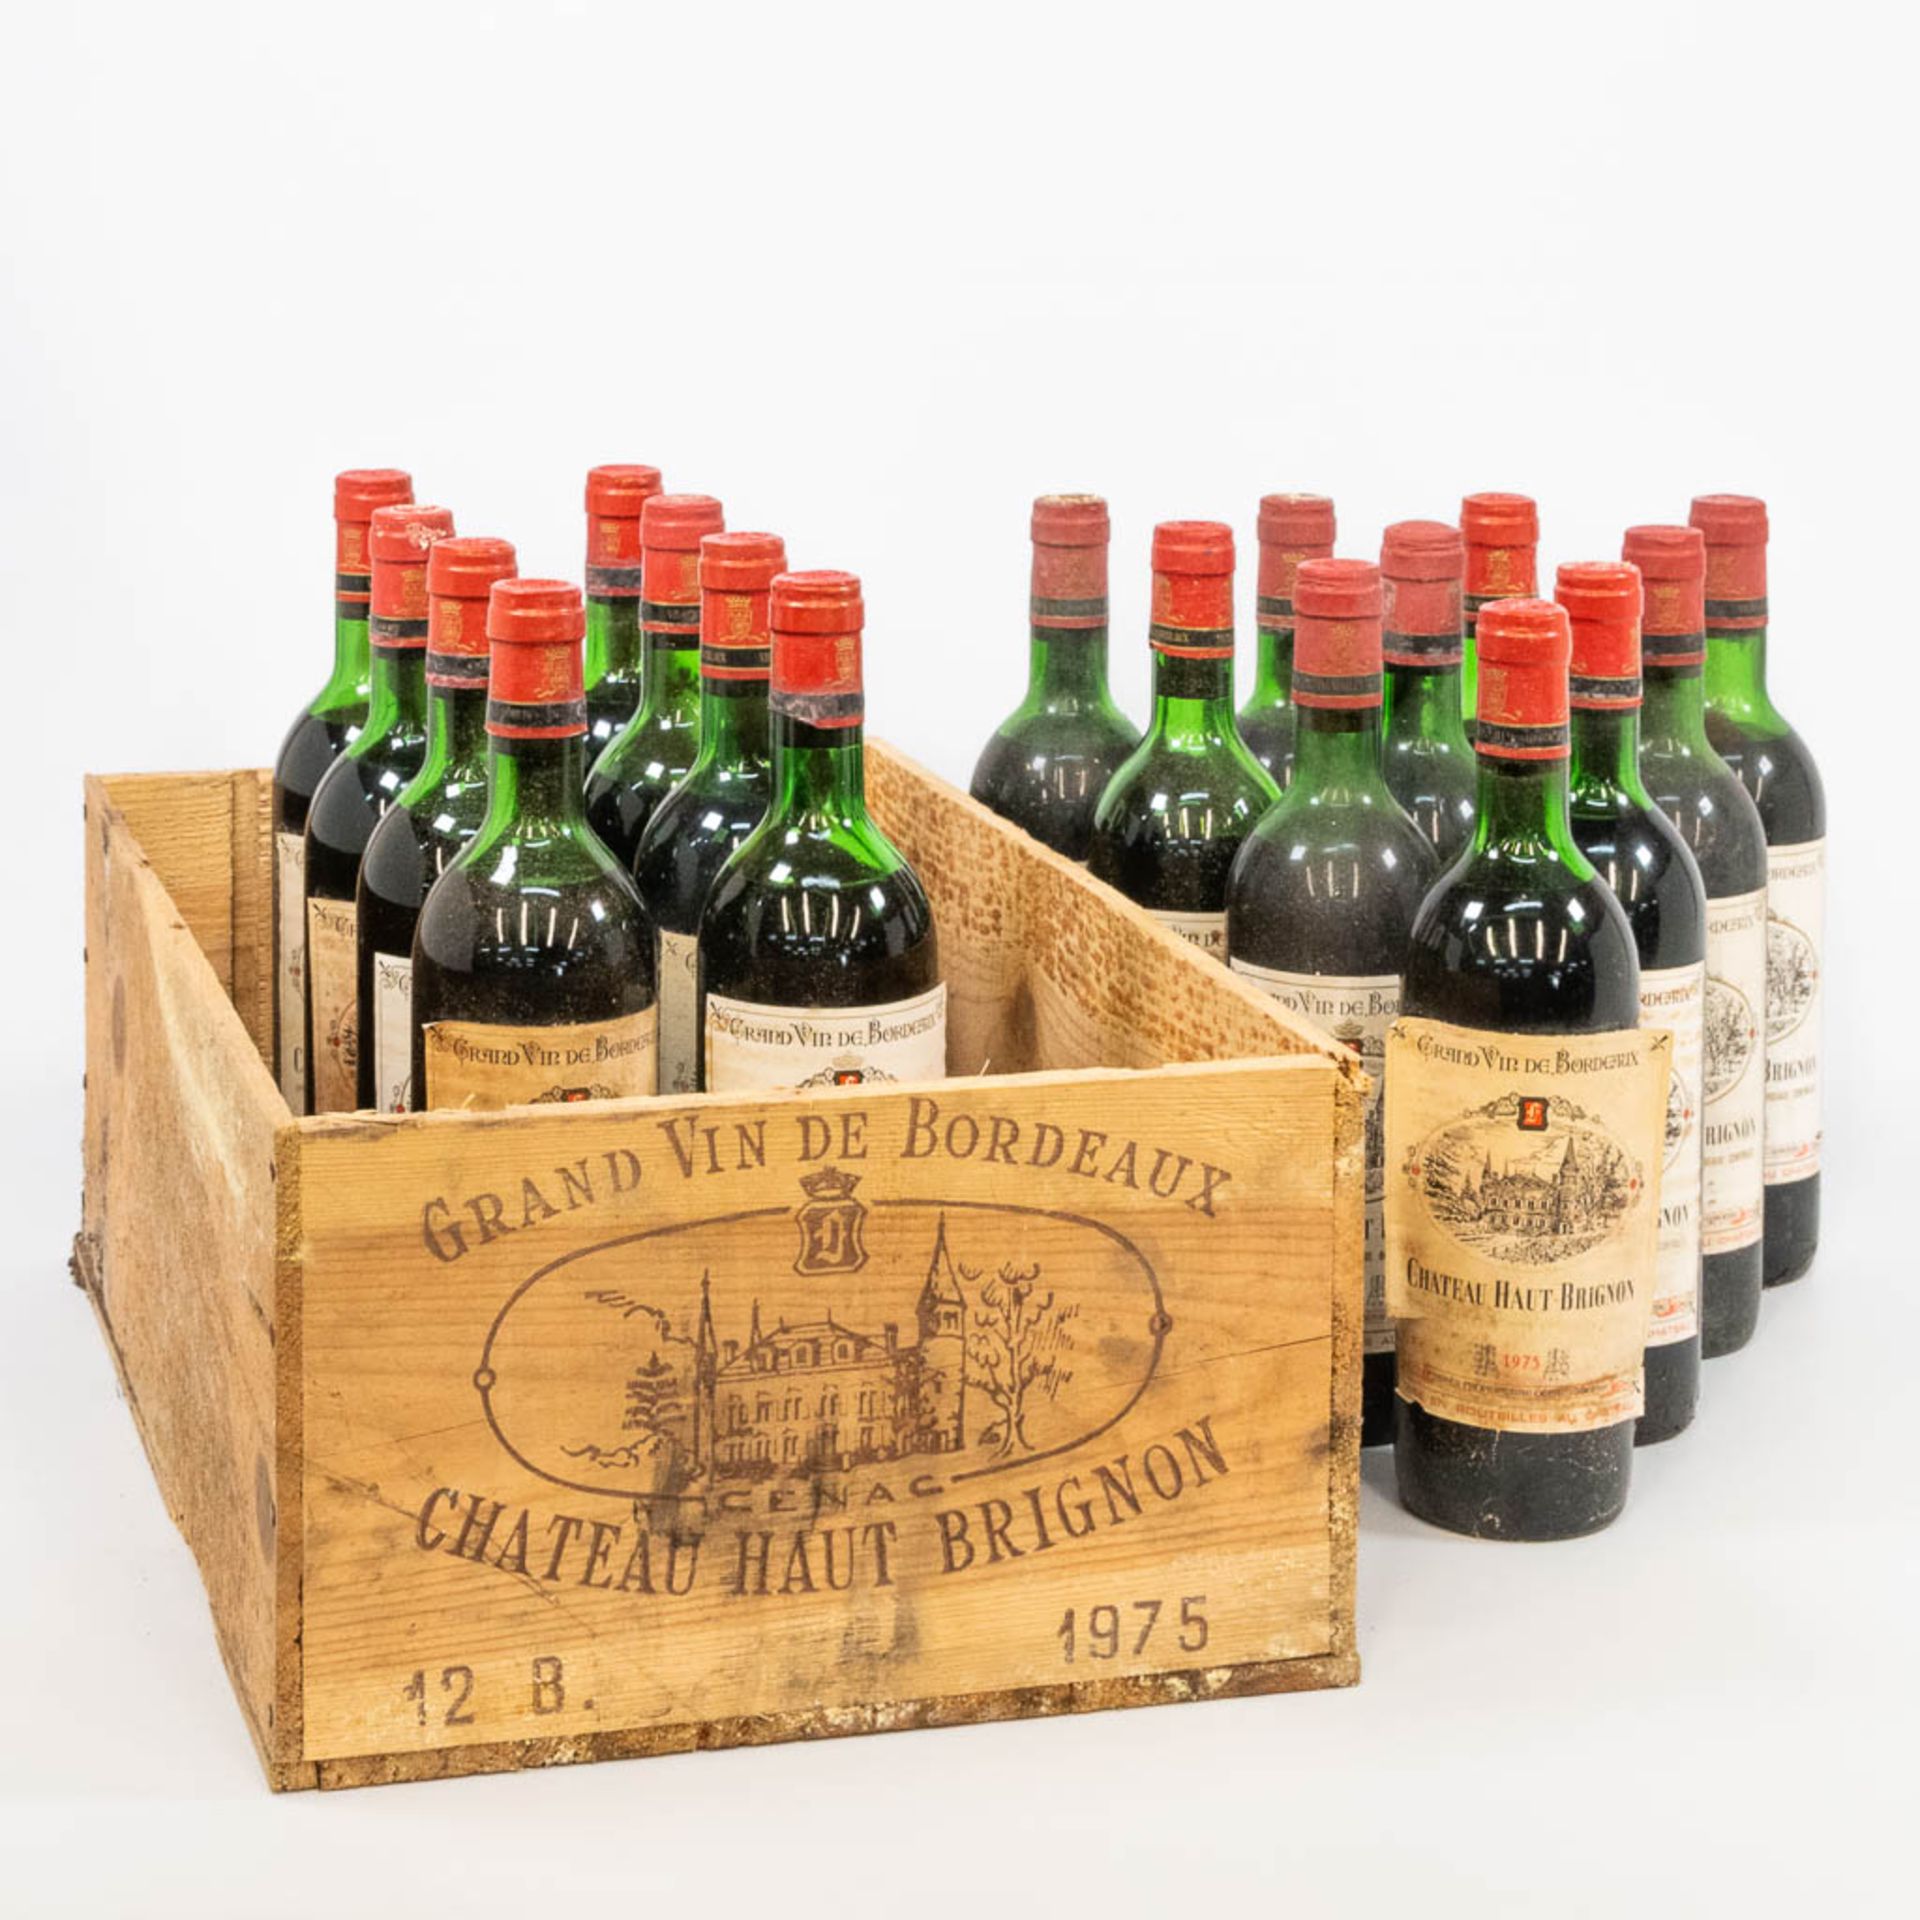 A collection of 18 bottles of Chateau Haut Brignon 1975 with original wood crate. .